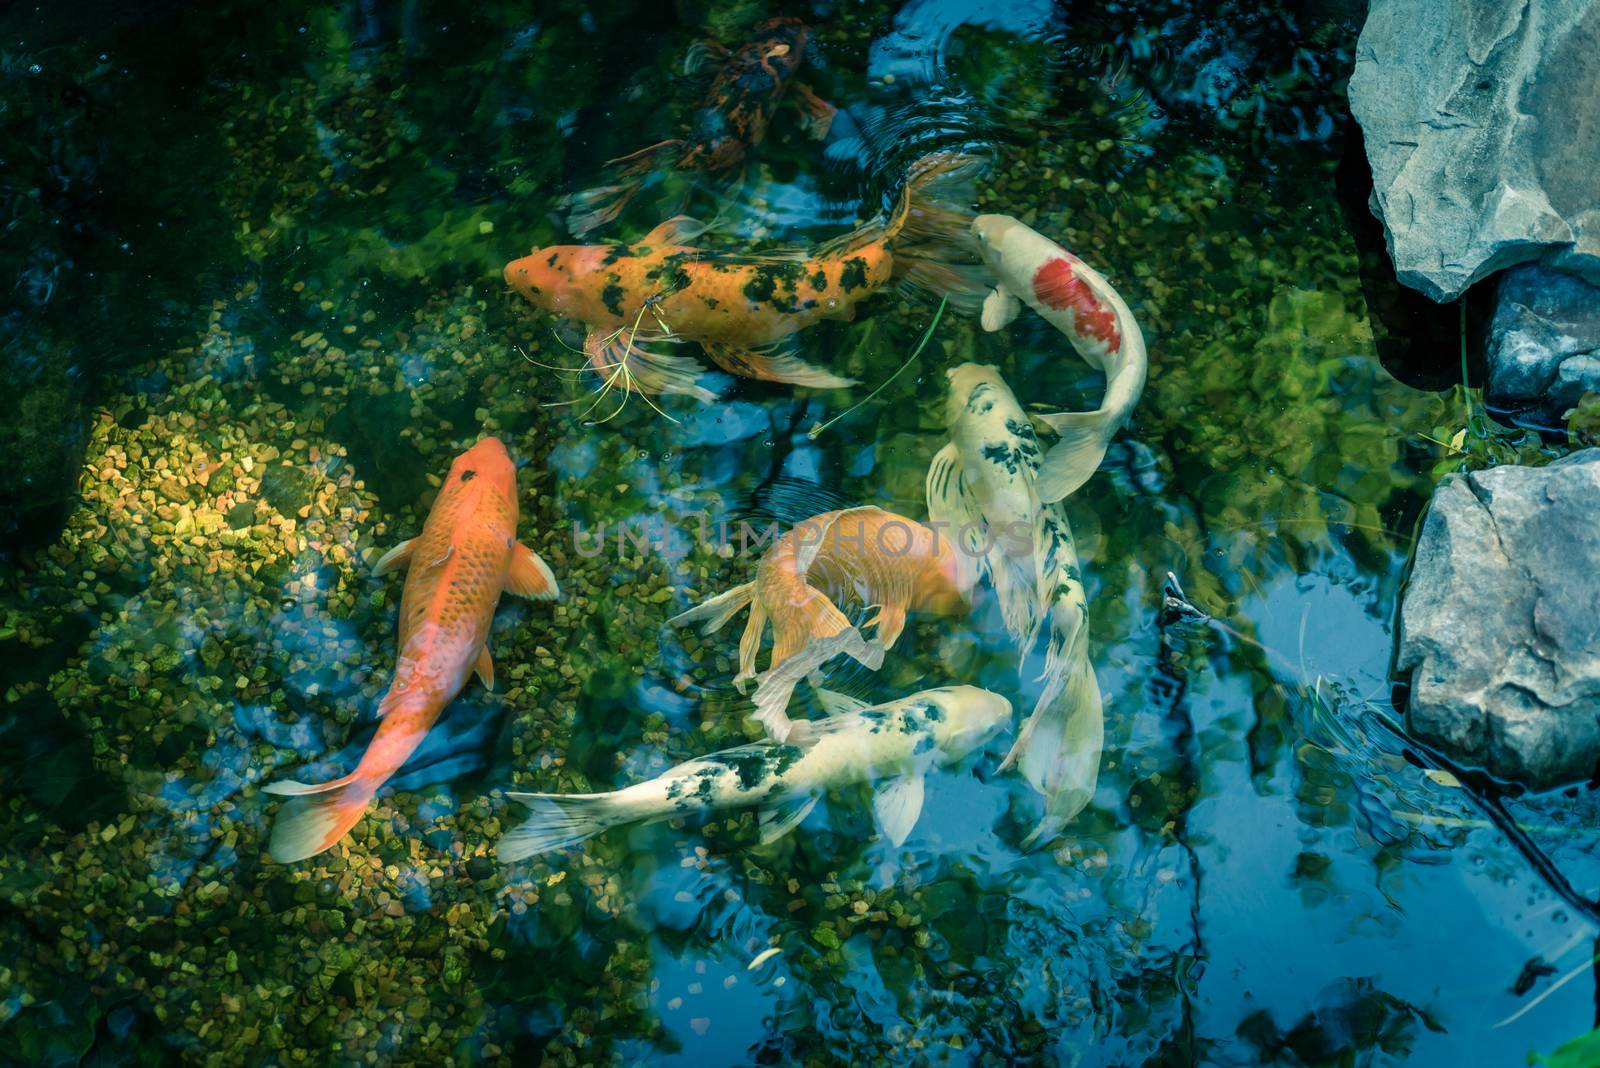 Top view shallow pond with landscape rocks and colorful koi fishes swimming at botanical garden near Dallas, Texas, America